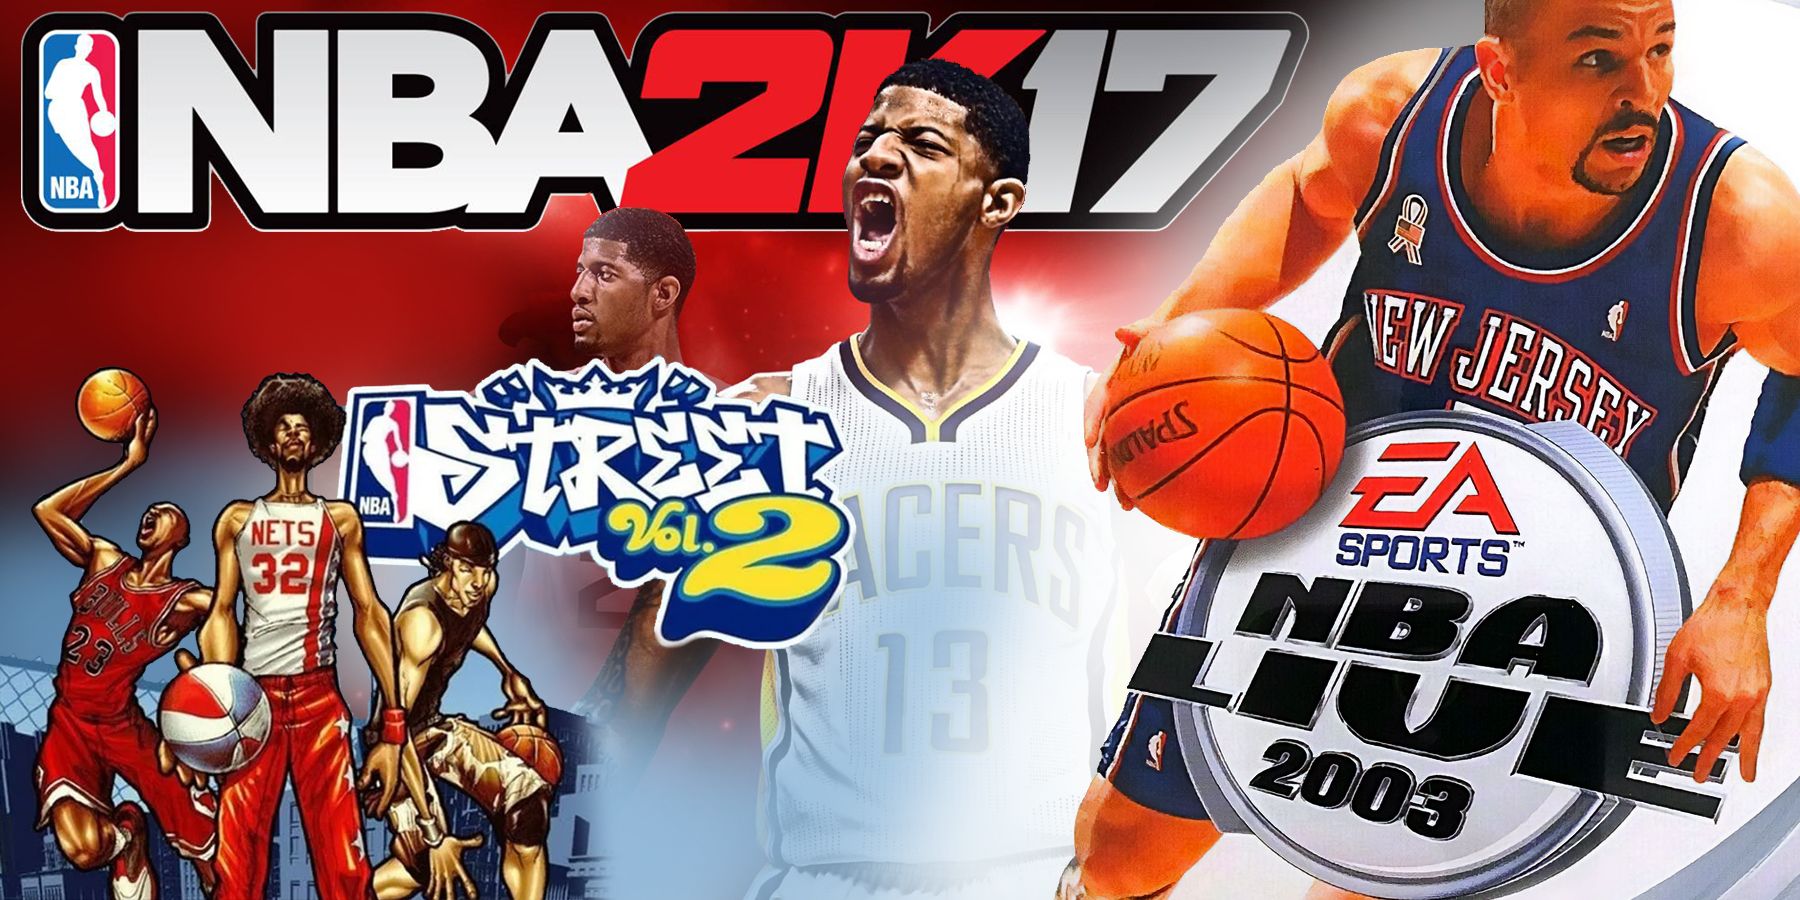 Video Games Of Old: Who Was The Worst Athlete Of All Time? 